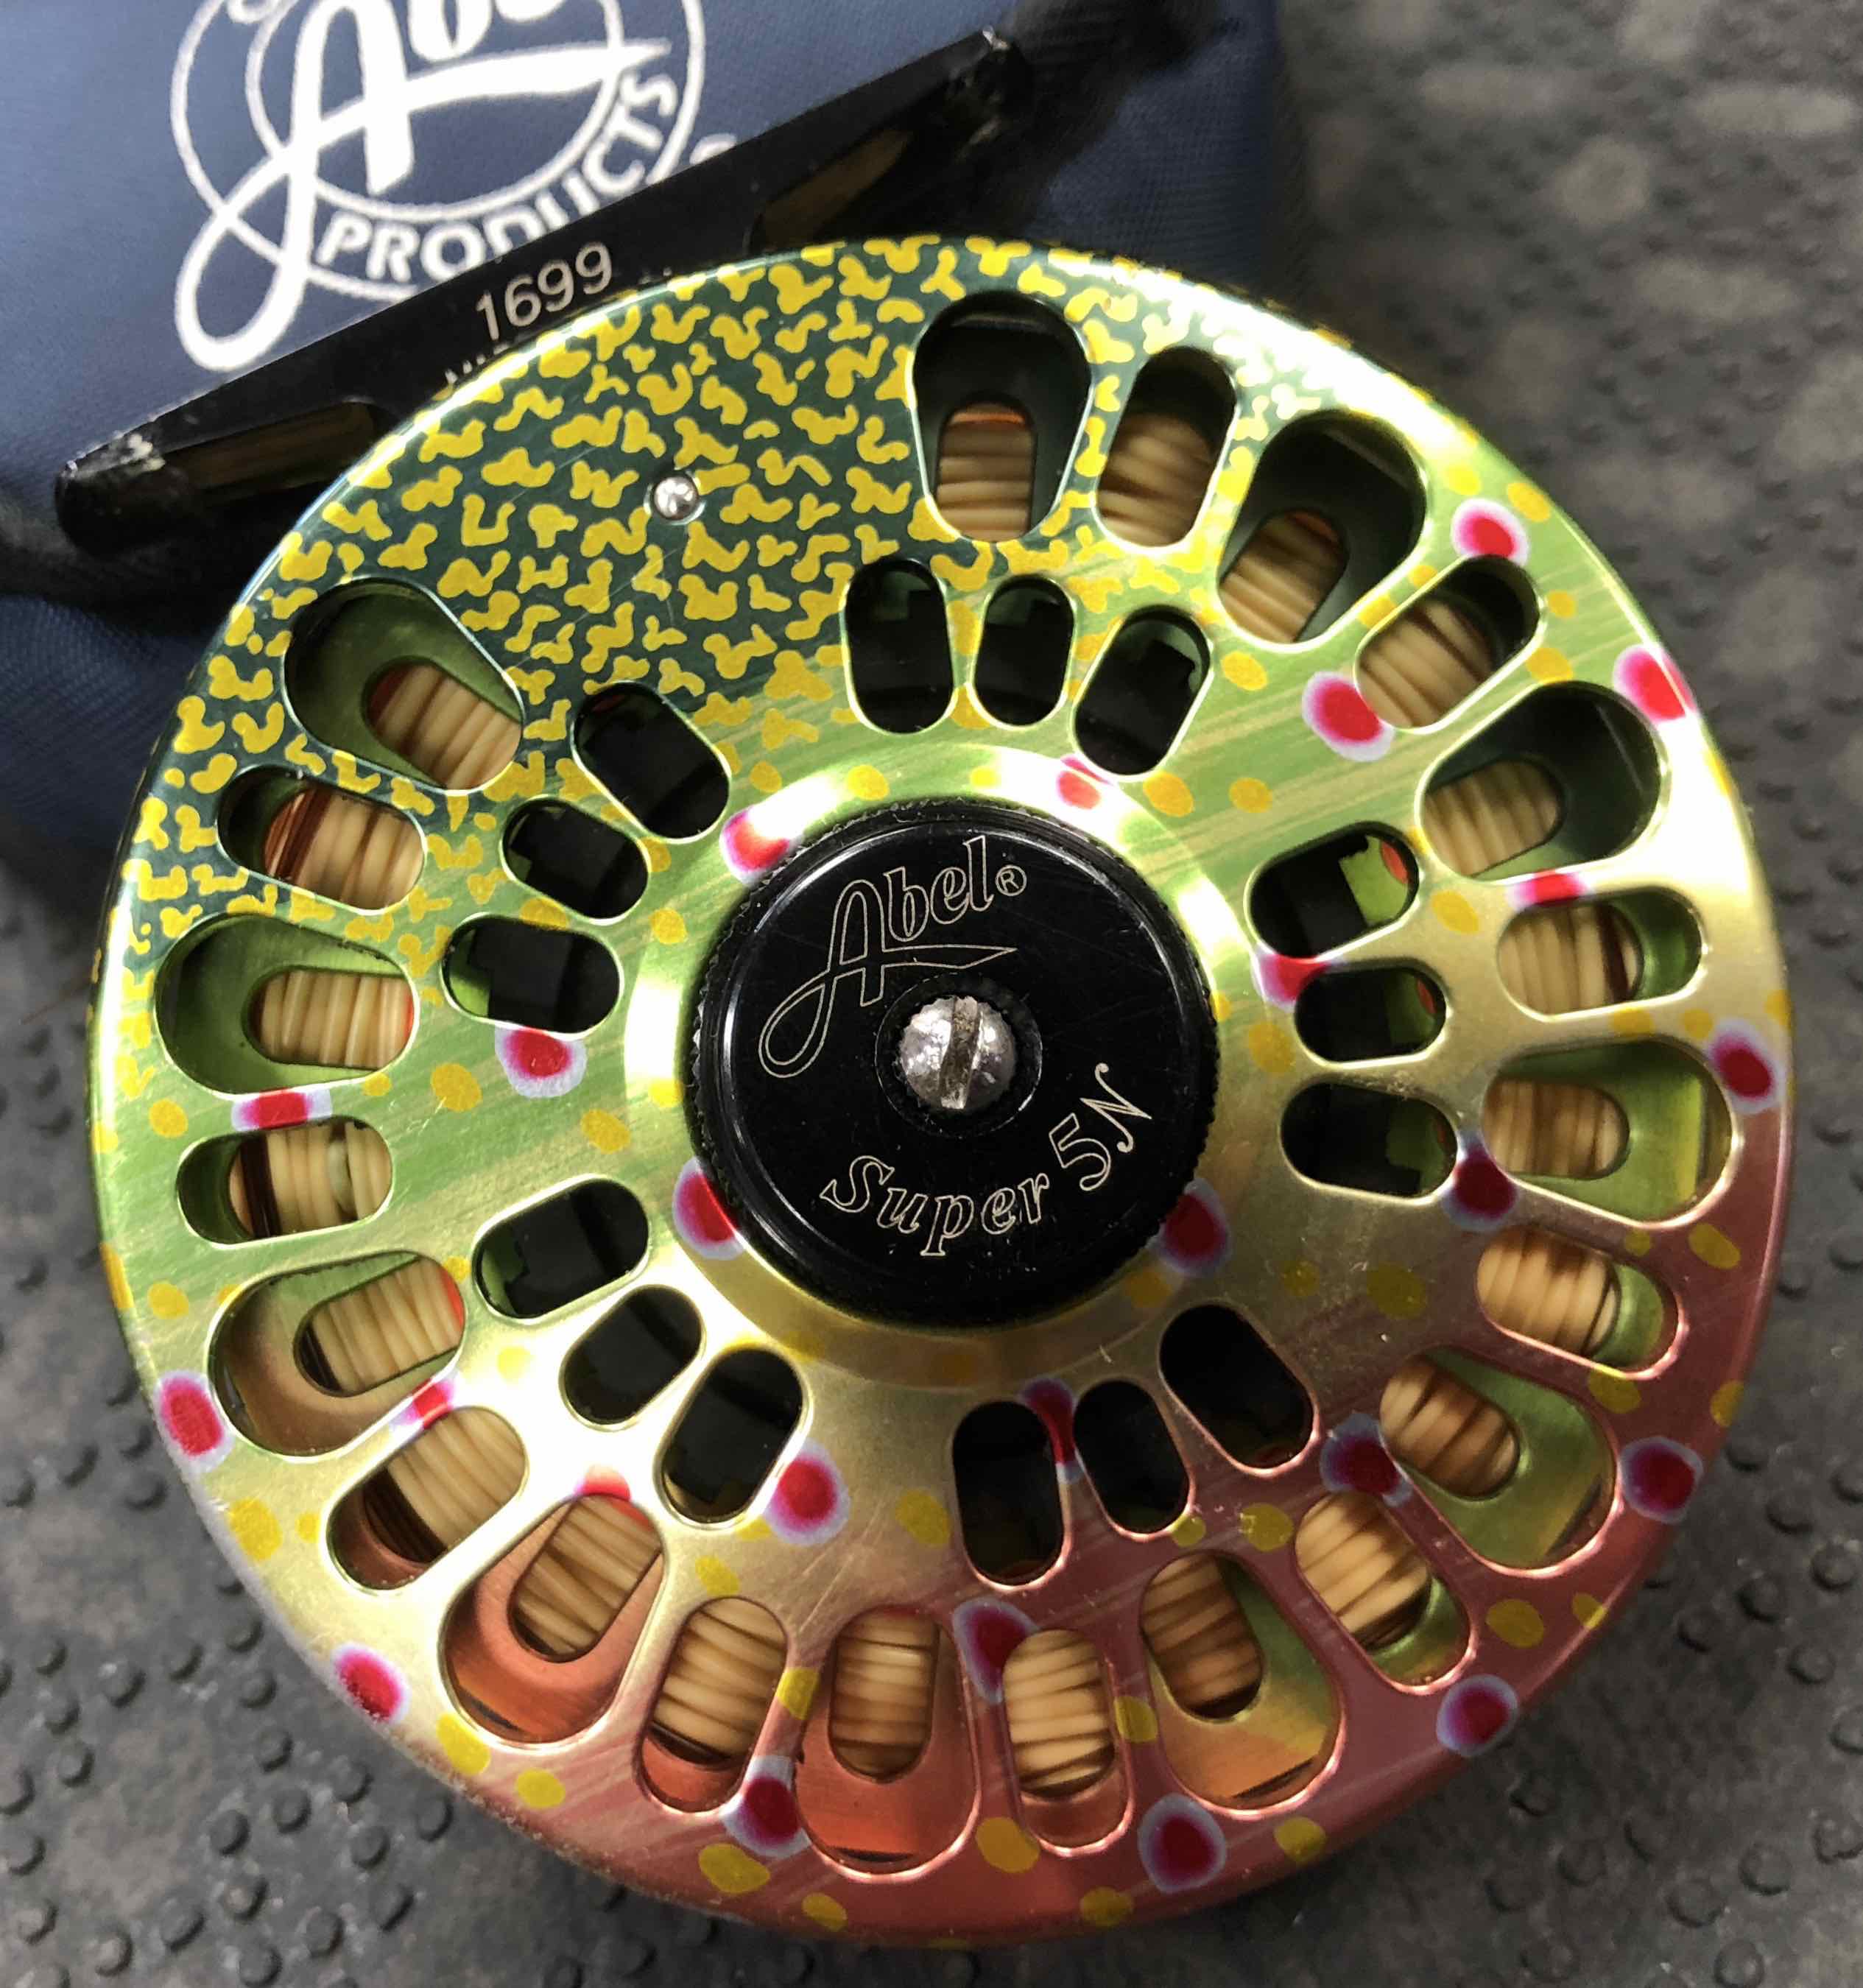 Abel Super Series 5wt Fly Reel c/w Optional Brook Trout Graphic, Pouch & Fly Line - LIKE NEW! - $450